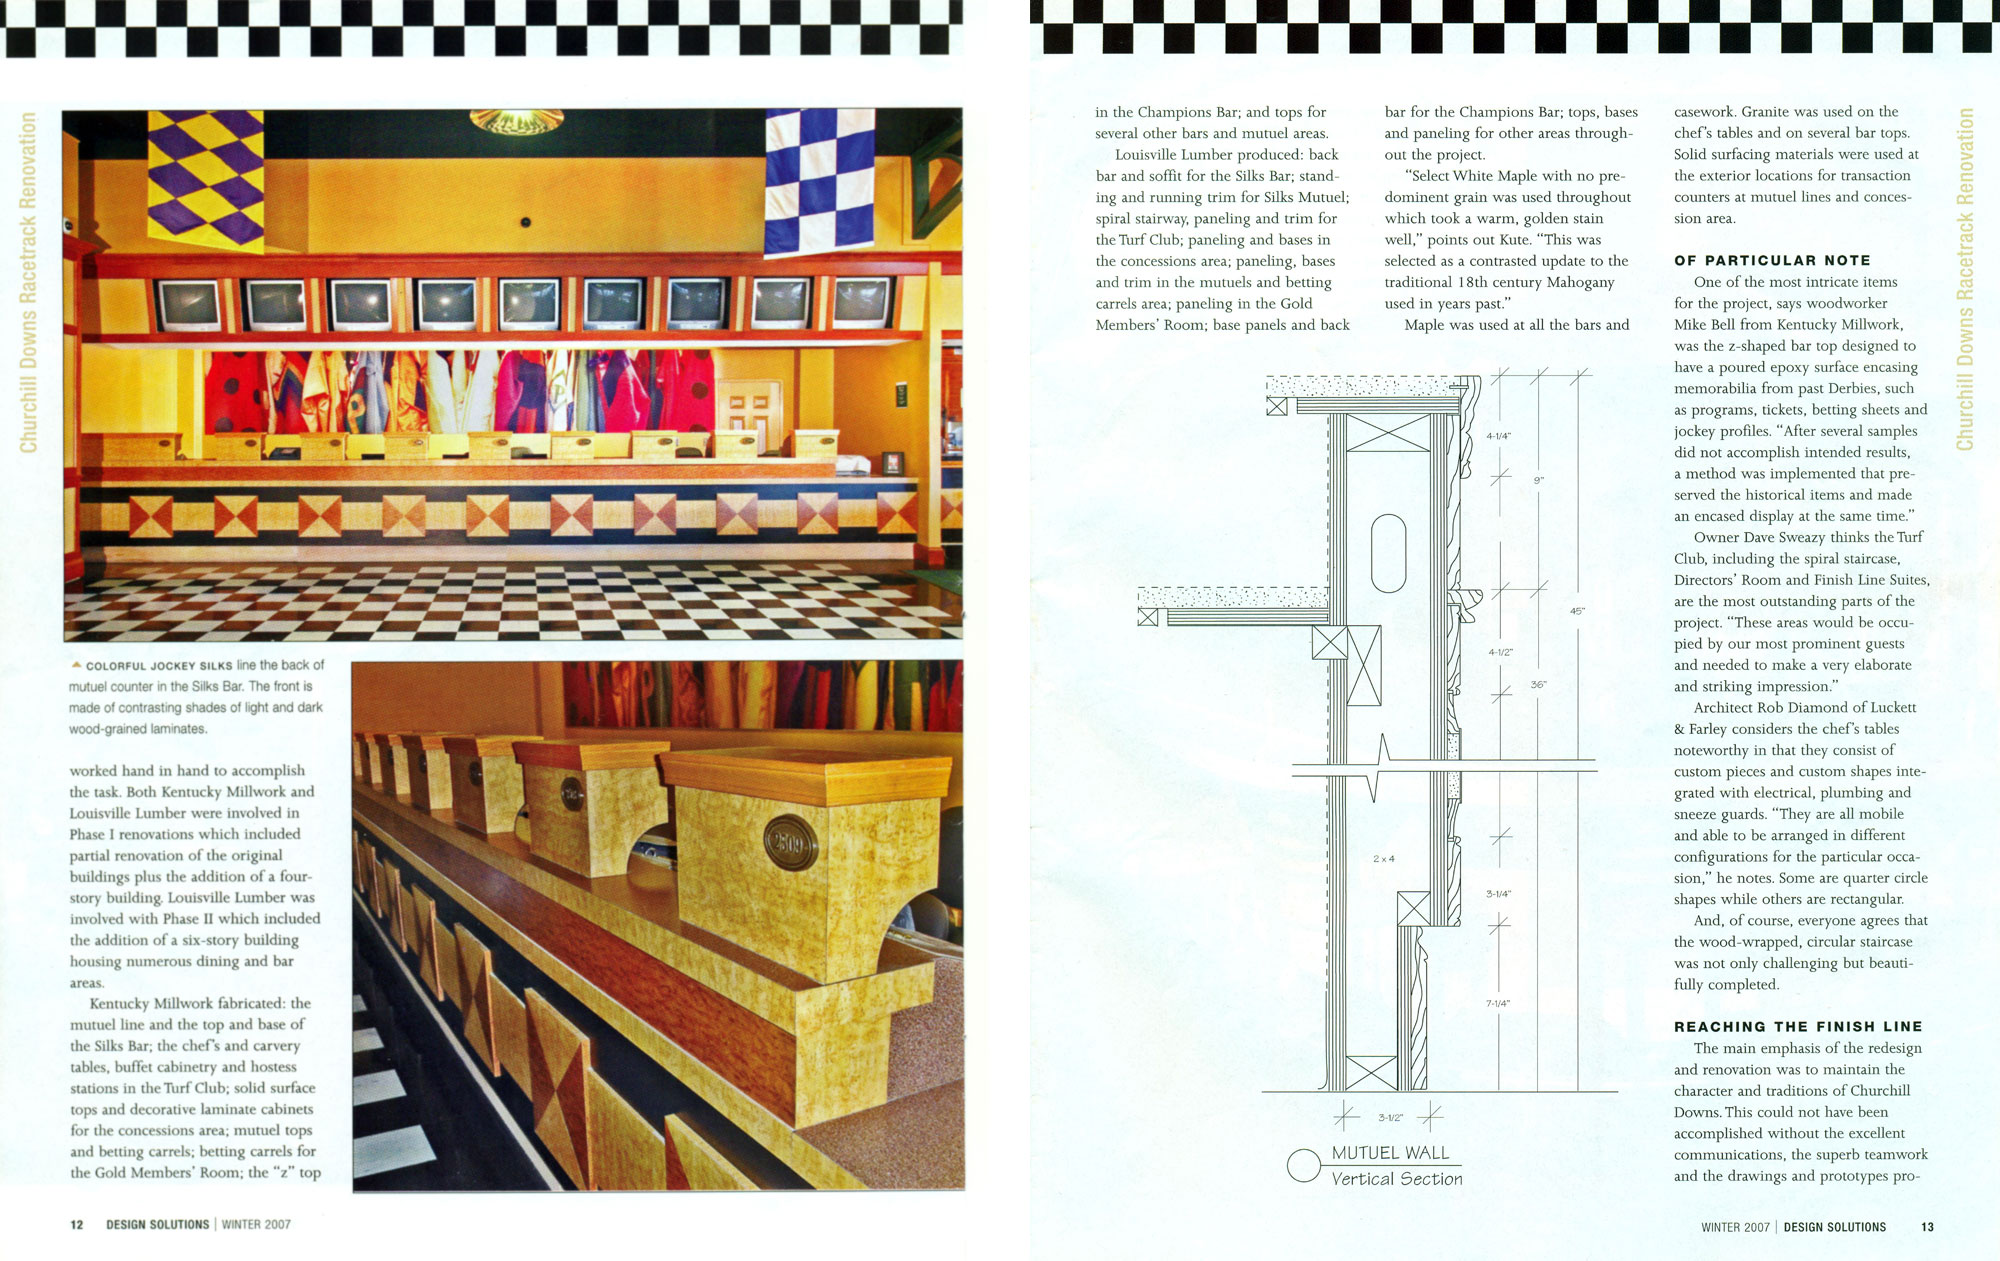 Pictures of wainscoting used in the Churchill Downs magazine